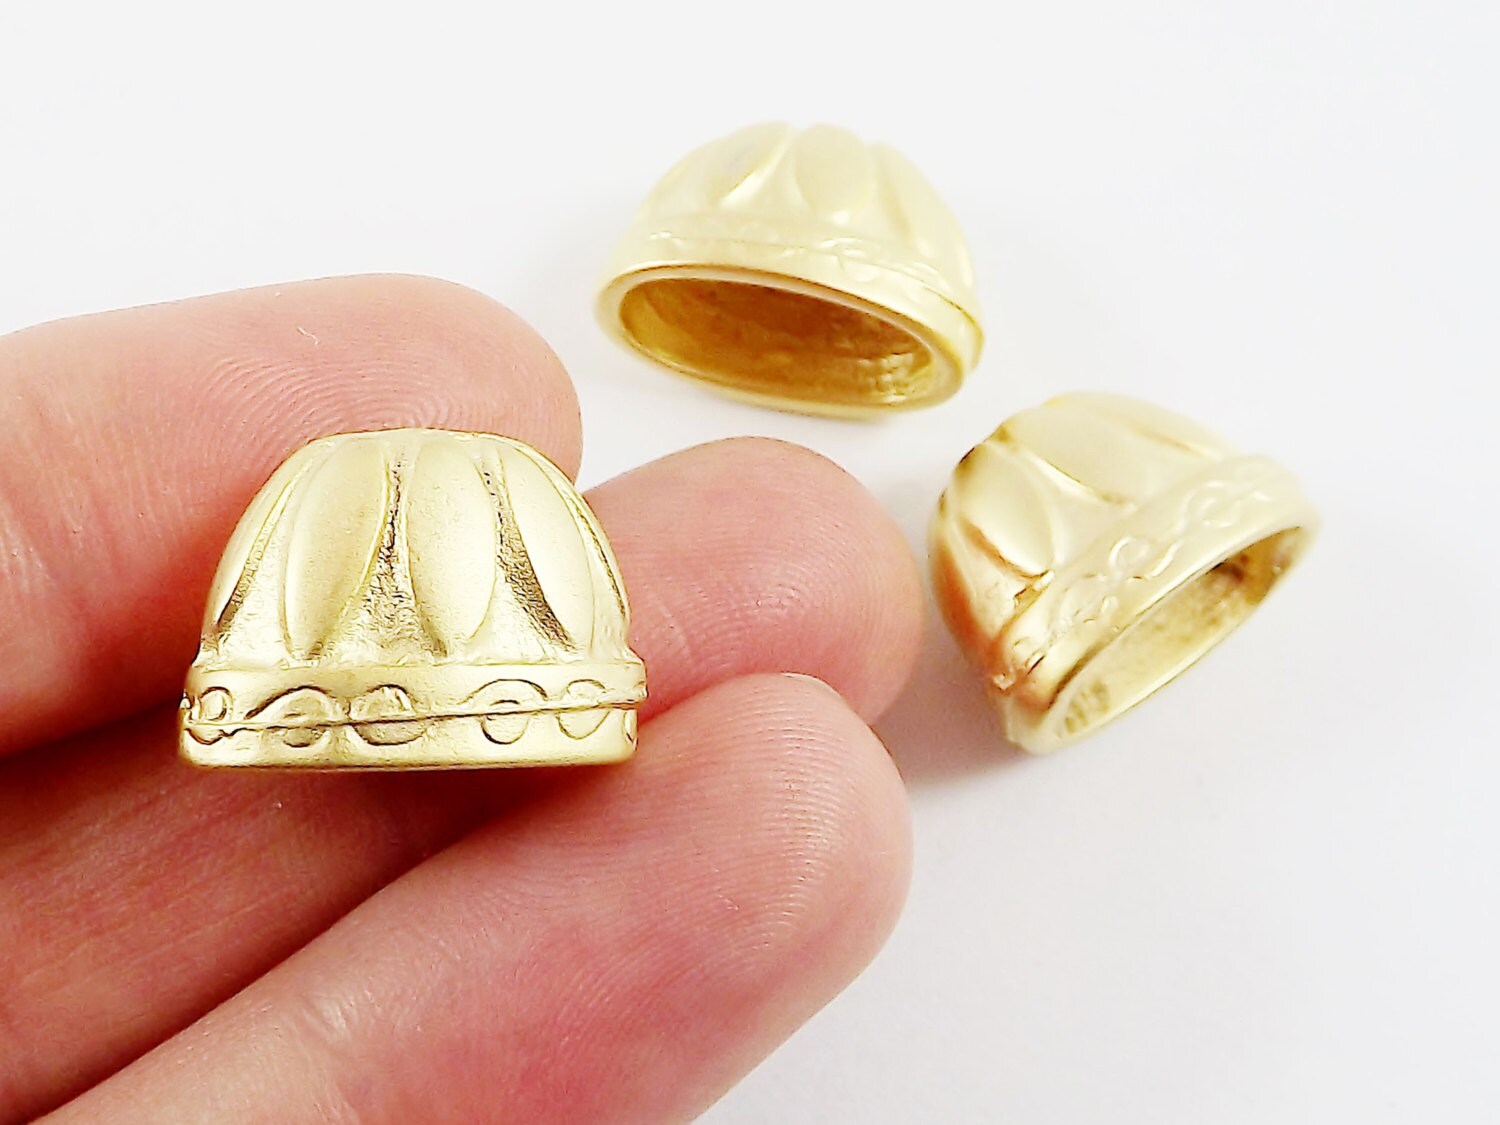 3 Large Rustic Cast Flat Cone Bead End Caps - 22k Matte Gold Plated Round  Bead caps